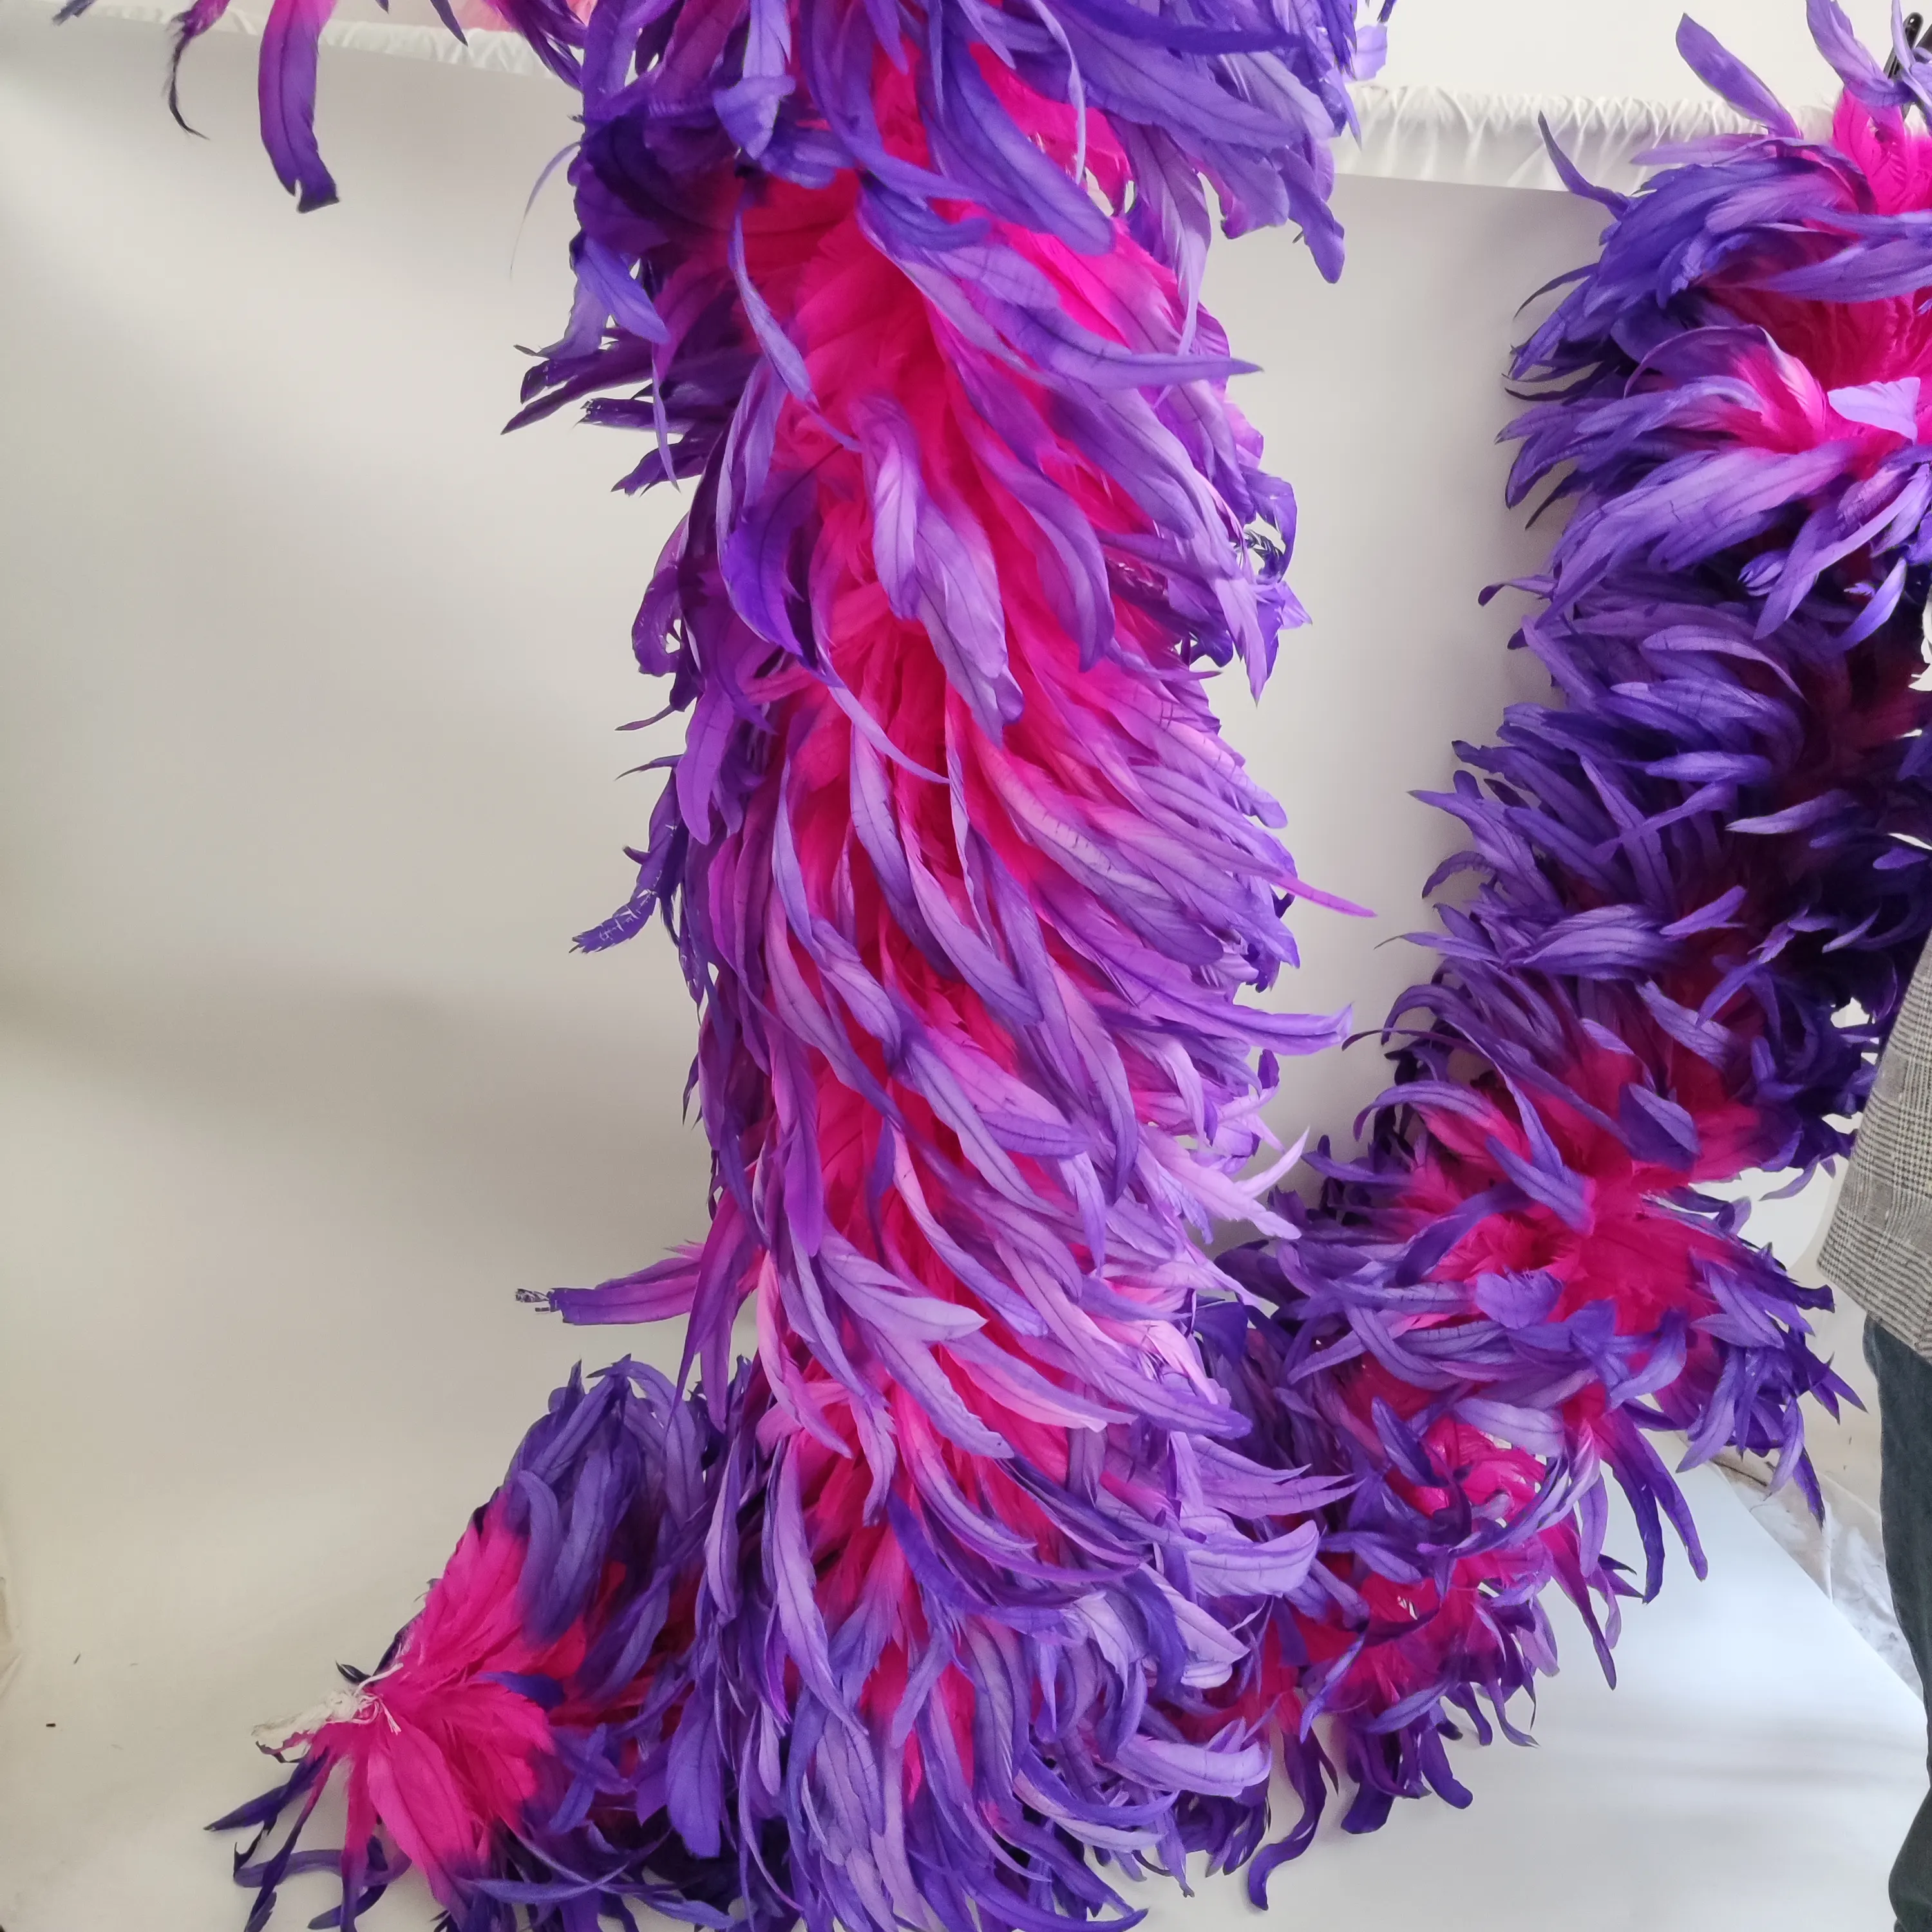 Halloween Costume Decoration with Turkey Flat Feather Boa 2 Yards -Long Royal Blue, 200 g Large Feather Boa Dress Up Party 